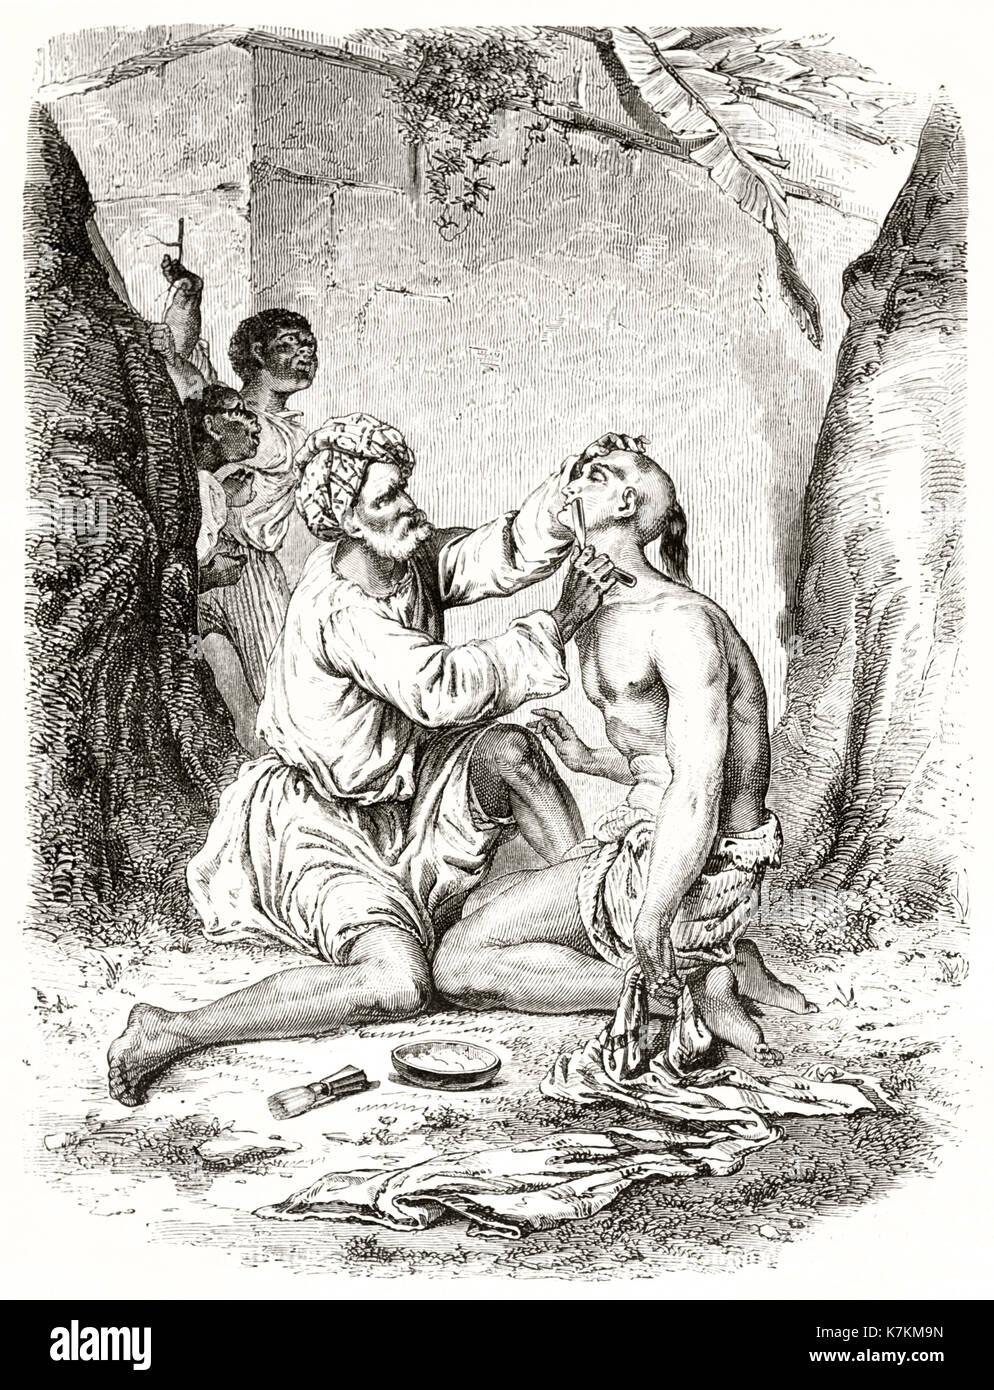 Old illustration of indian barber in Reunion island. By De Berard after Roussin, publ. on Le Tour du Monde, Paris, 1862 Stock Photo